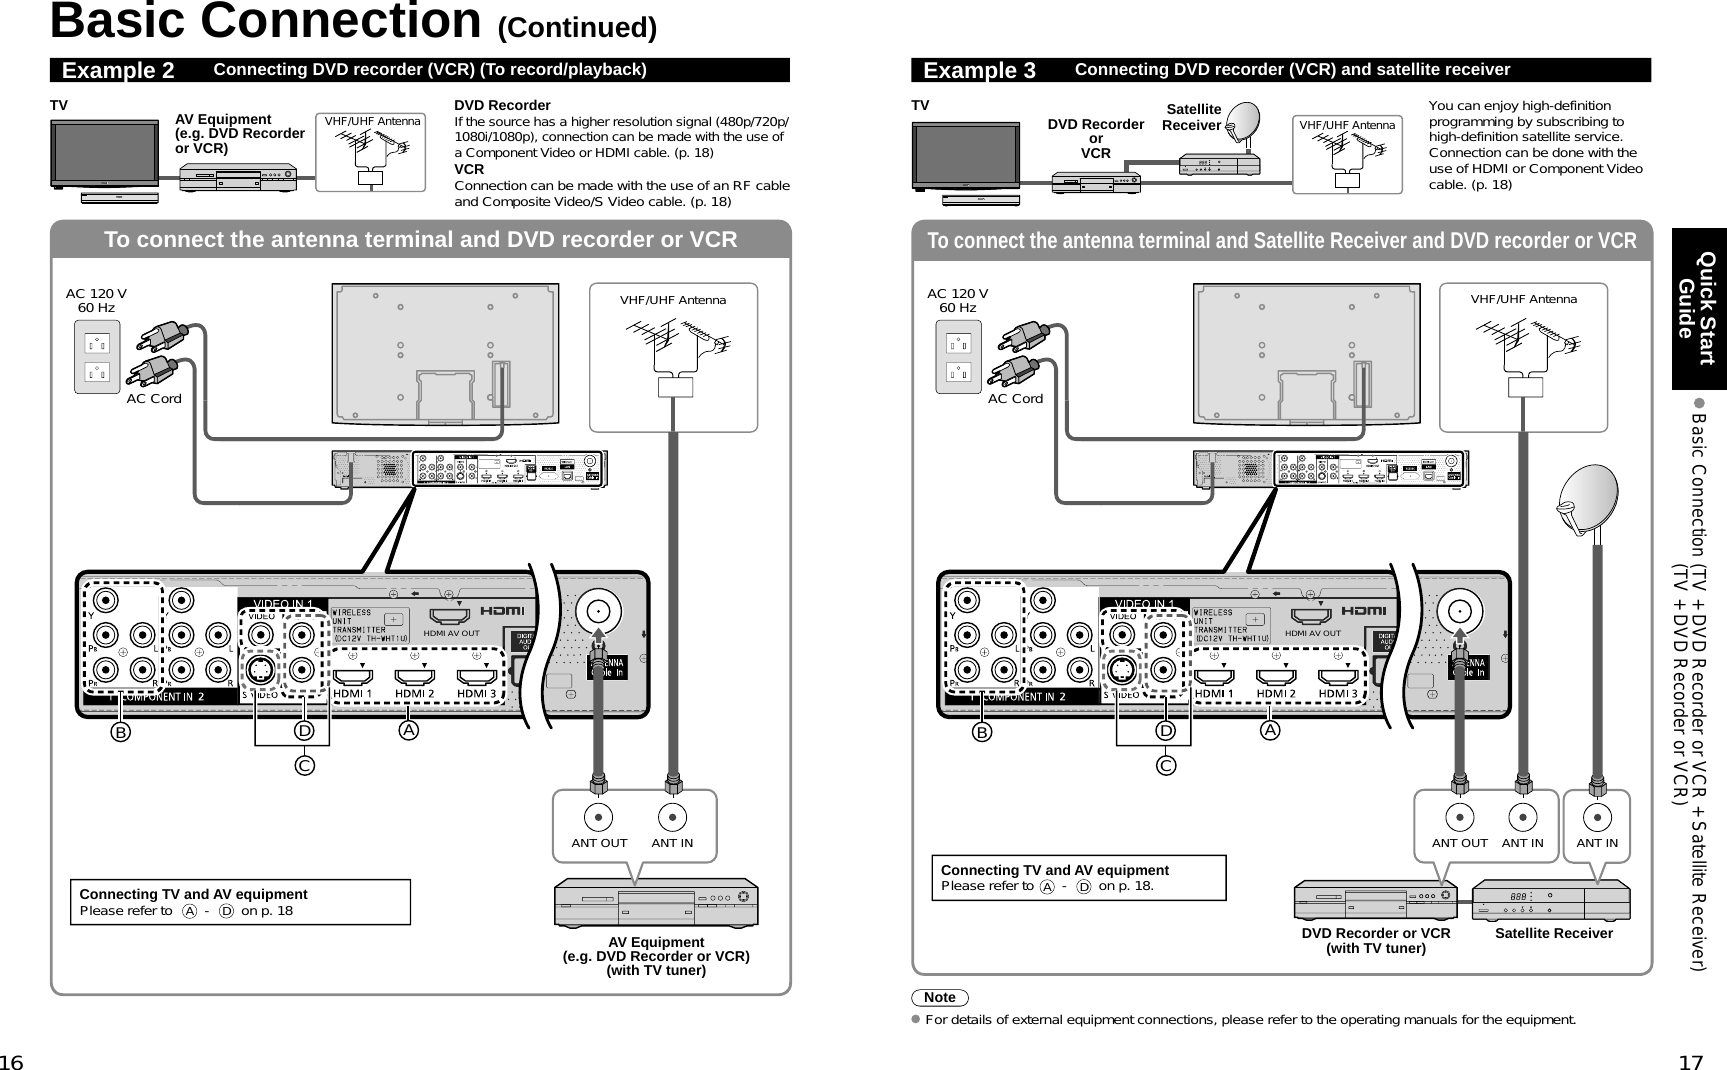 16 17Quick Start Guide  Basic Connection  (TV + DVD Recorder or VCR + Satellite Receiver)(TV + DVD Recorder or VCR)To connect the antenna terminal and DVD recorder or VCRTo connect the antenna terminal and Satellite Receiver and DVD recorder or VCRANT OUT ANT INHDMI AV OUTBDACHDMI AV OUTANT INANT OUT ANT INBDACBasic Connection (Continued)Example 2 Connecting DVD recorder (VCR) (To record/playback)DVD RecorderIf the source has a higher resolution signal (480p/720p/1080i/1080p), connection can be made with the use of a Component Video or HDMI cable. (p. 18)VCRConnection can be made with the use of an RF cable and Composite Video/S Video cable. (p. 18)VHF/UHF AntennaTV AV Equipment(e.g. DVD Recorder or VCR)AC CordAC 120 V60 Hz VHF/UHF AntennaAV Equipment(e.g. DVD Recorder or VCR)(with TV tuner)Connecting TV and AV equipmentPlease refer to A - D on p. 18Example 3 Connecting DVD recorder (VCR) and satellite receiverDVD RecorderorVCRSatelliteReceiverTVVHF/UHF AntennaYou can enjoy high-definition programming by subscribing to high-definition satellite service. Connection can be done with the use of HDMI or Component Video cable. (p. 18)NoteFor details of external equipment connections, please refer to the operating manuals for the equipment.Satellite ReceiverDVD Recorder or VCR(with TV tuner)VHF/UHF AntennaConnecting TV and AV equipmentPlease refer toA - D on p. 18.AC CordAC 120 V60 Hz